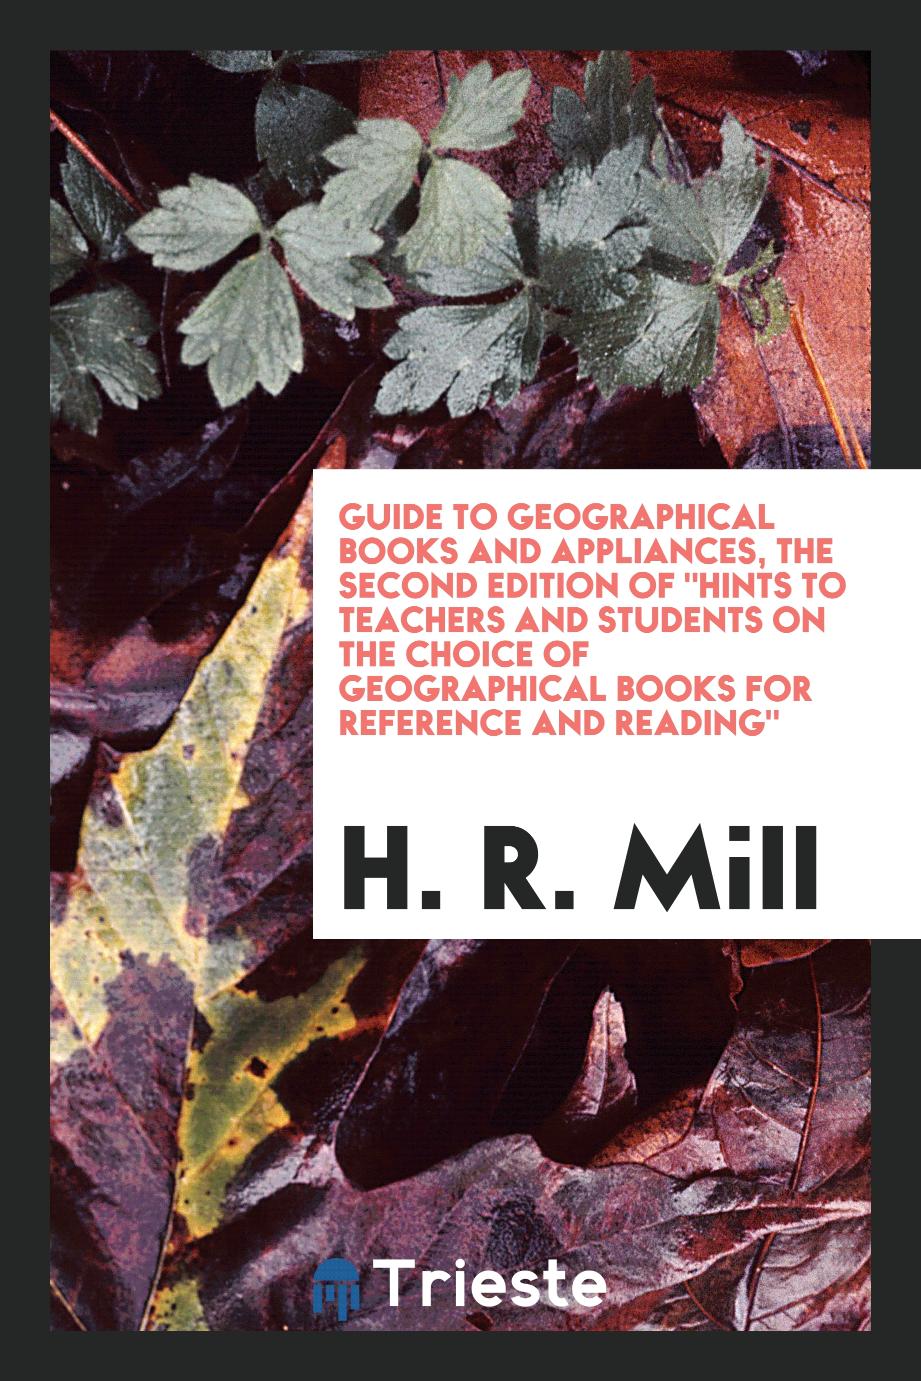 Guide to geographical books and appliances, the second edition of "Hints to teachers and students on the choice of geographical books for reference and reading"